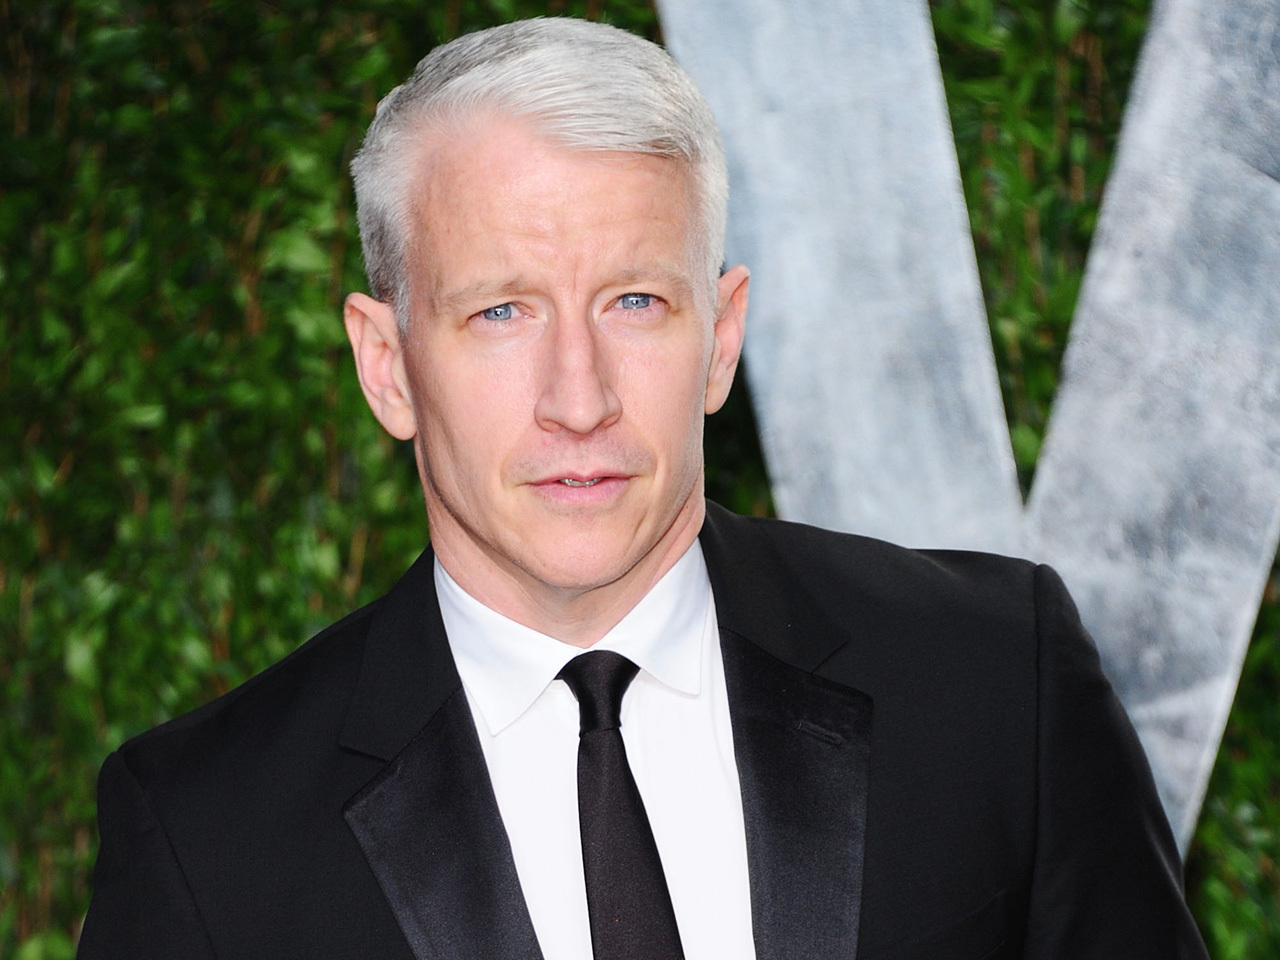 Anderson Cooper Is Worth More Money Than You Think